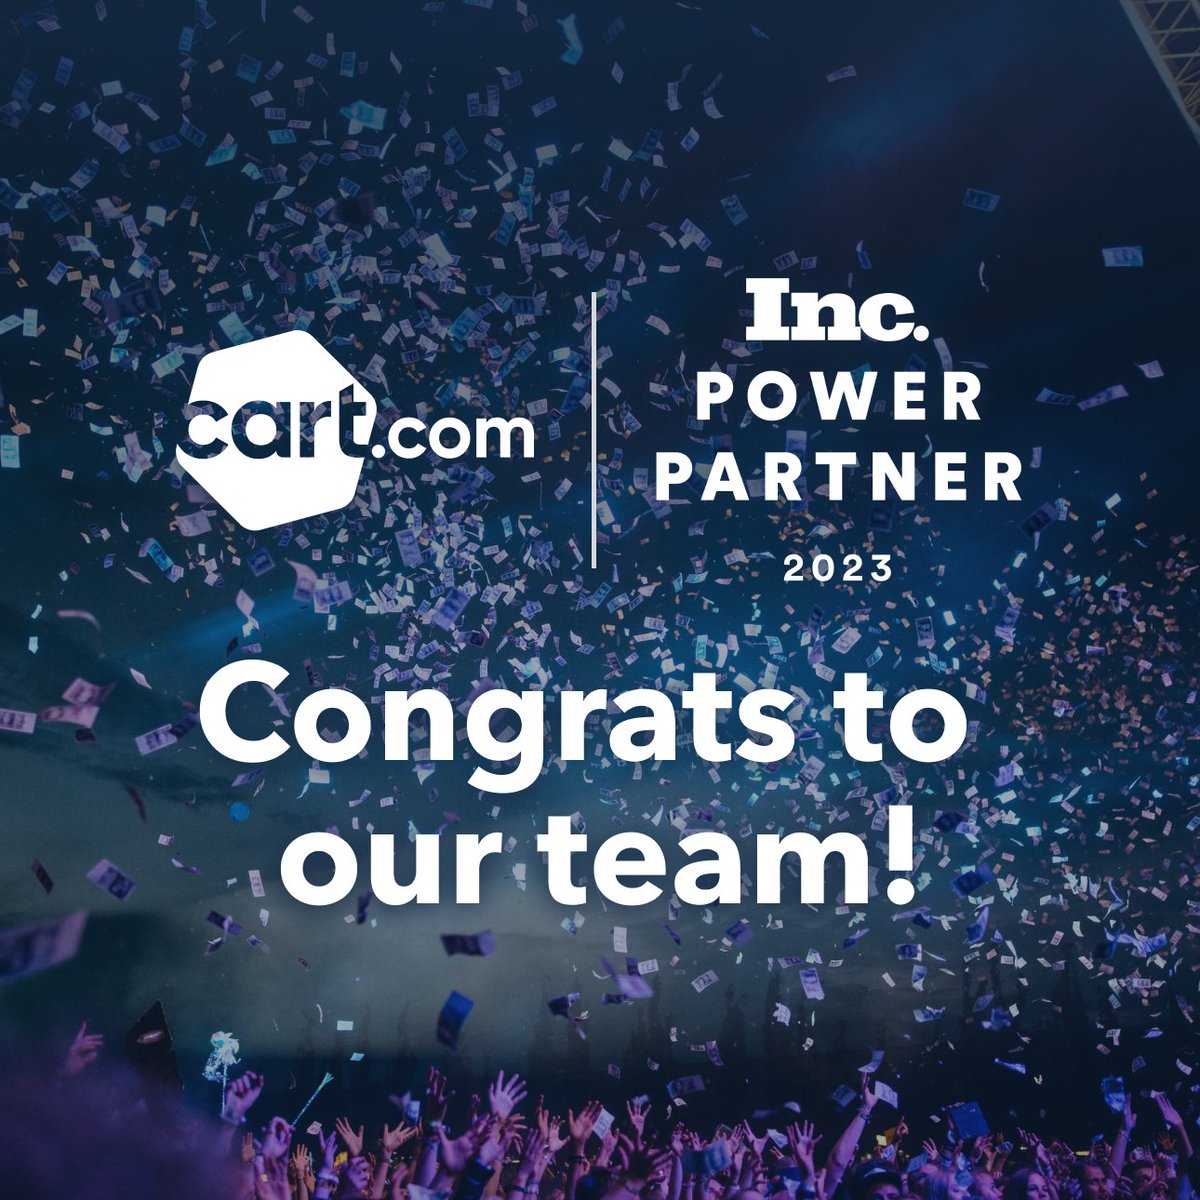 Congratulations 🎉 to our team—Cart.com made Inc. Magazine's 2023 #PowerPartner Awards 🤝 as part of a group of top B2B companies across the globe. 

👀 Read full announcement here: bit.ly/4714Y5p

#partnerships #B2B #incmagazine #incpowerpartner